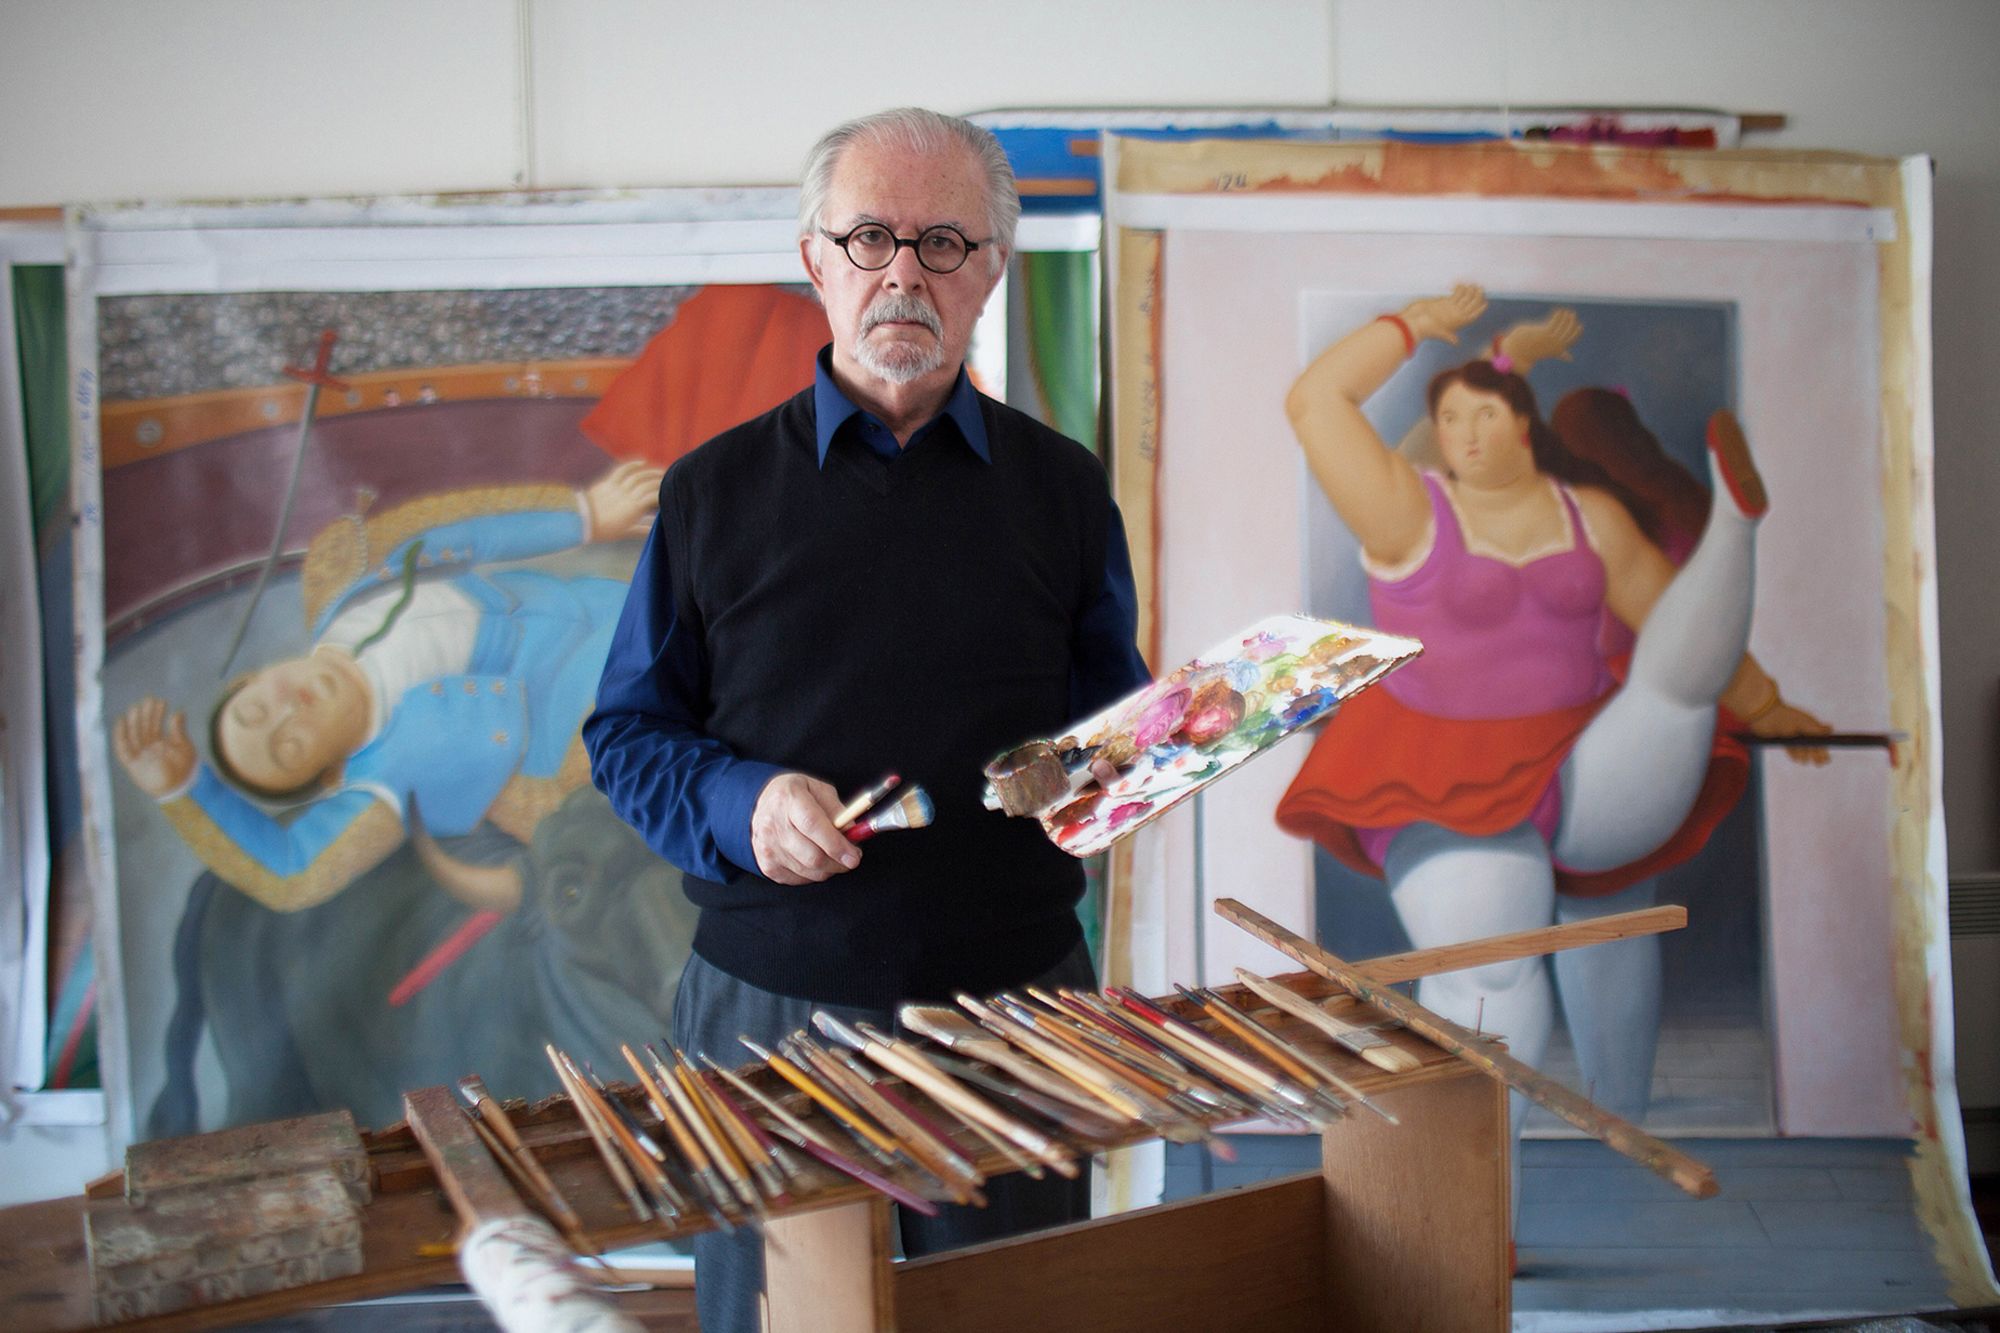 Colombian painter and sculptor Fernando Botero posing in his studio with paint brushes and palette in the hands. Behind him, a painting depicting a torero and another one portraying a dancer resting on the wall. Monte Carlo, 15th March 2012. (Photo by Massimo Sestini/Mondadori via Getty Images)